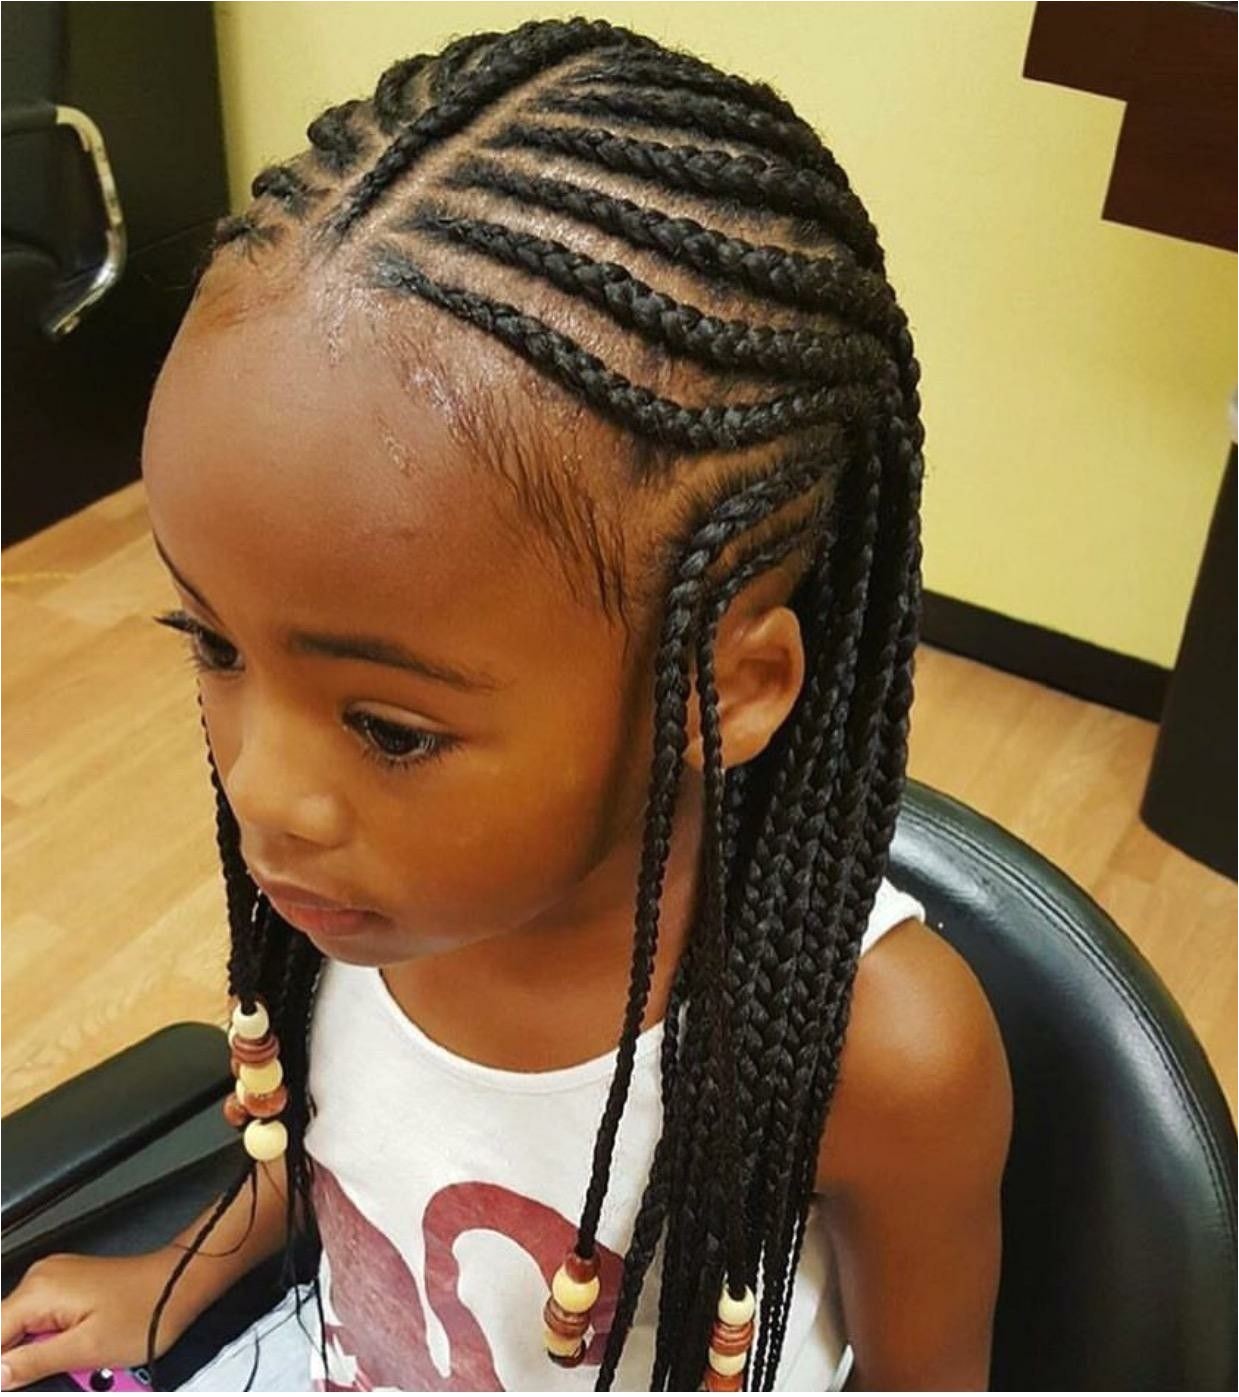 Black Little Girl Hairstyles with Bangs Official Lee Hairstyles for Gg & Nayeli In 2018 Pinterest